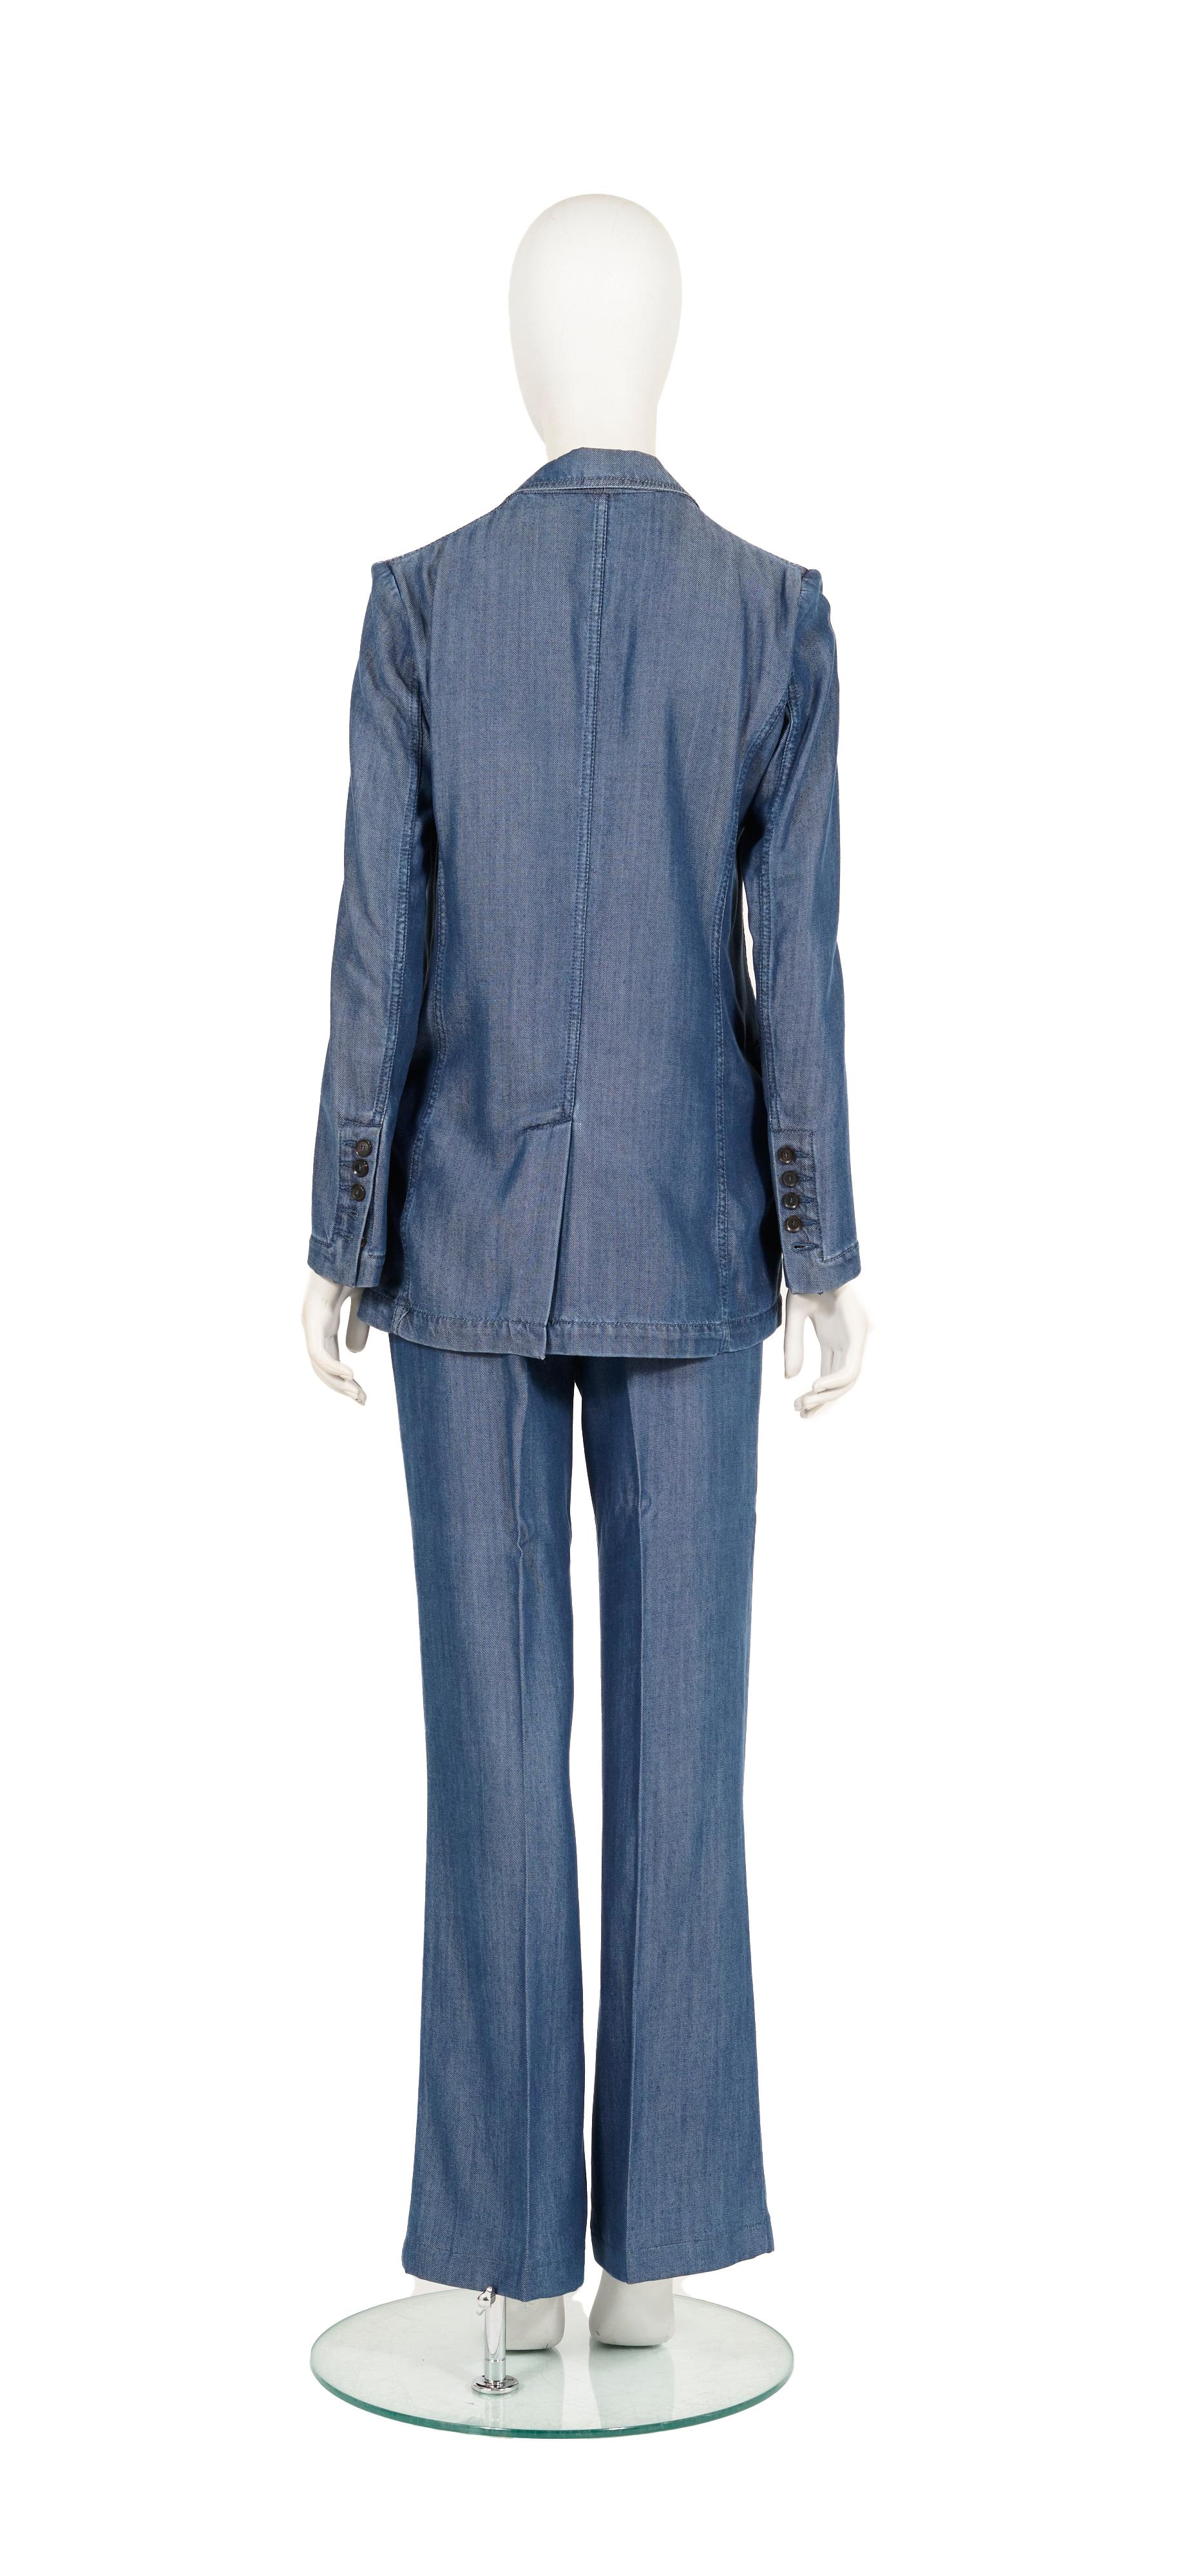 Gucci by Frida Giannini Resort 2013 Denim Tuxedo In Excellent Condition For Sale In Rome, IT